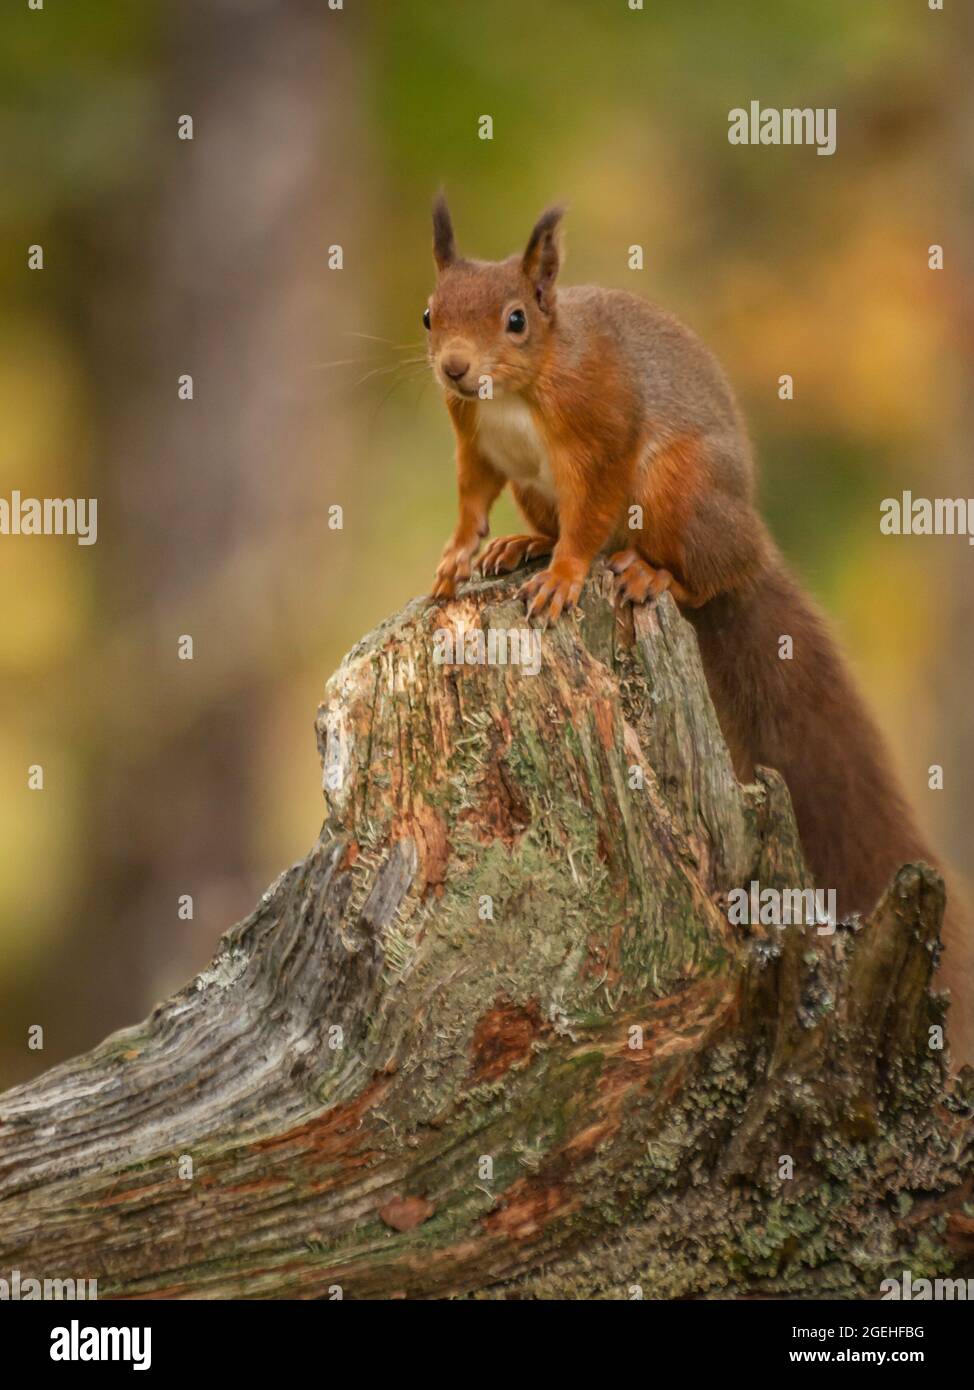 Red Squirrel (Sciurus vulgaris) perched on a tree stump in a forest setting. Stock Photo